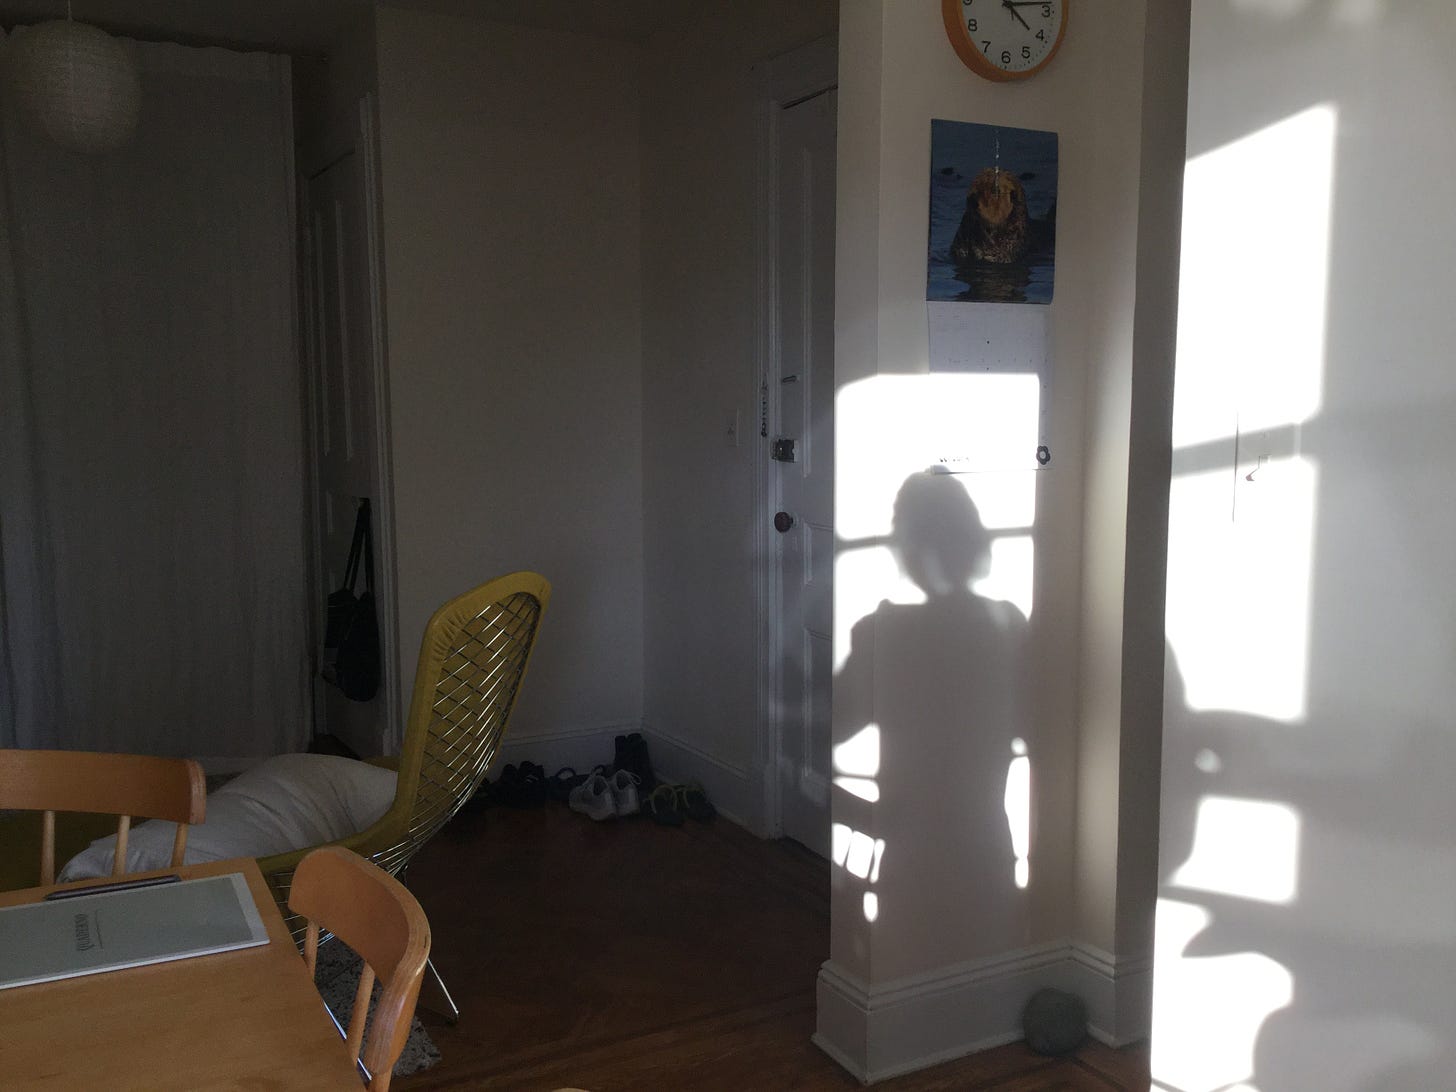 A bright light shines in through a window, making a shadow of a person on a wall. Below, there is a rock in a nook at the intersection of two walls.